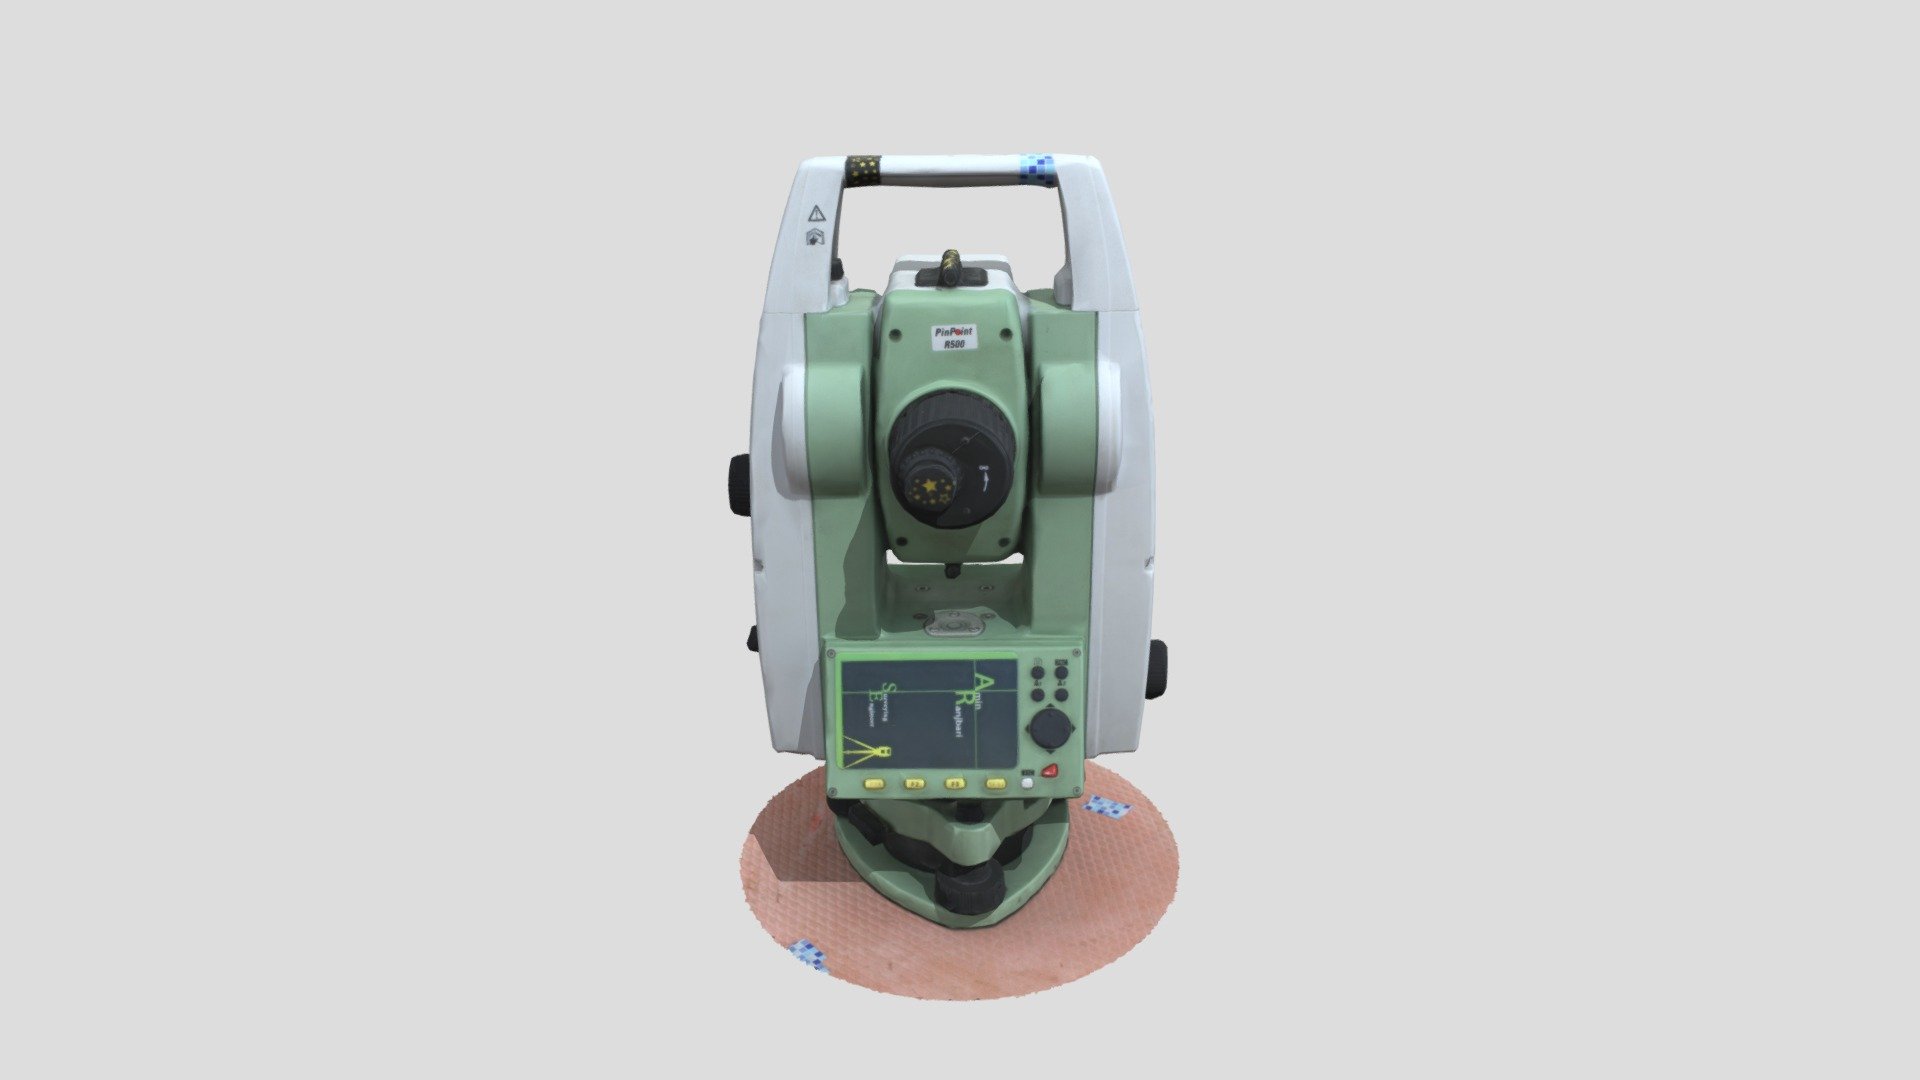 leica total station simulation software free download